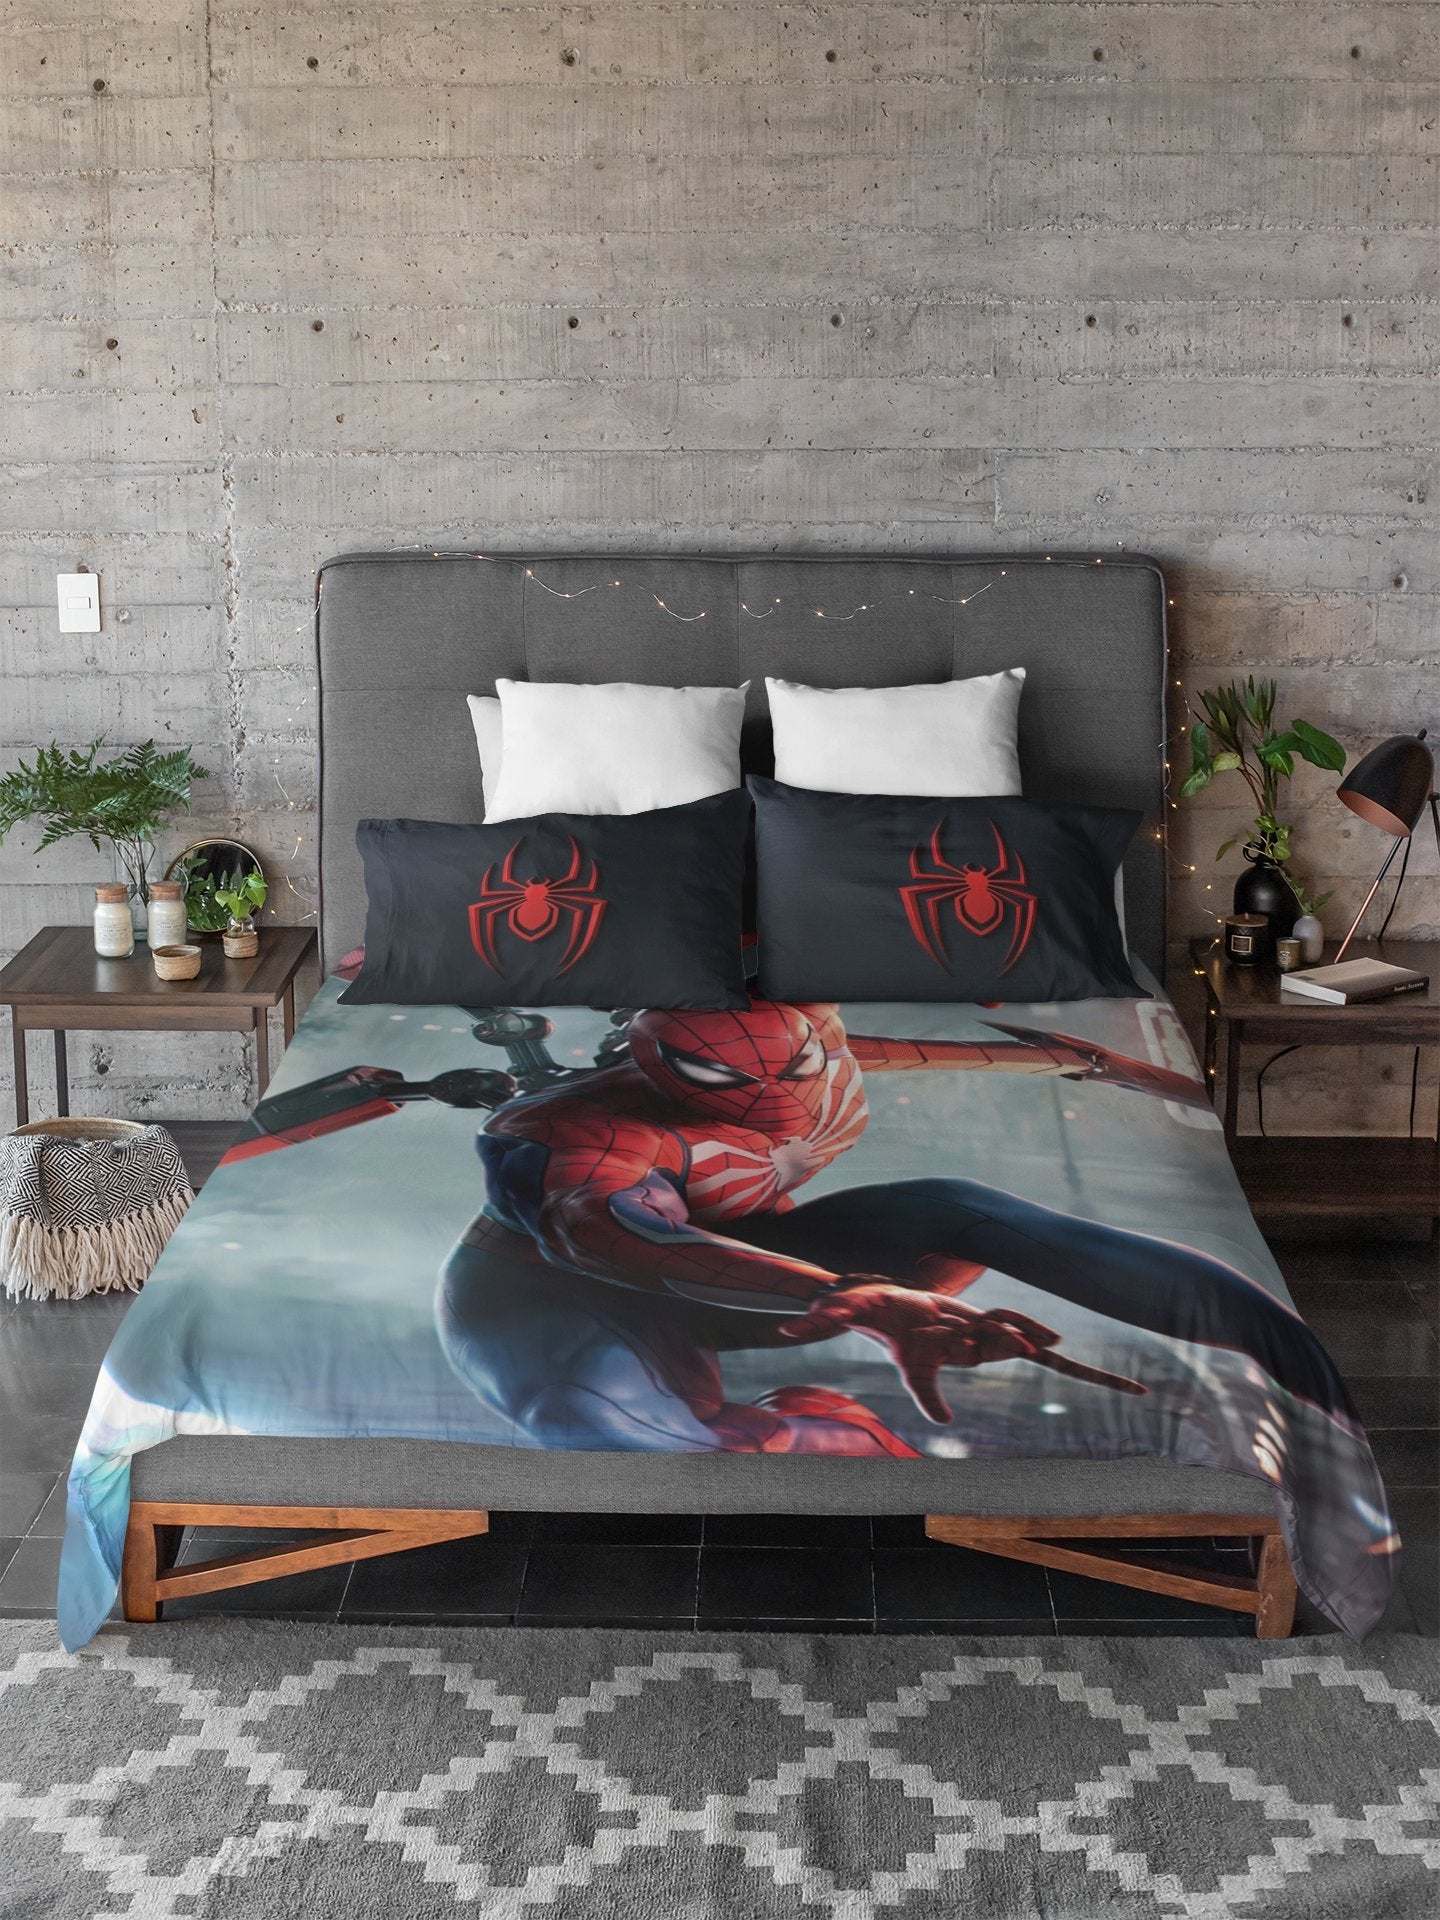 Marvel Bed Sheet Sets Featuring Spiderman